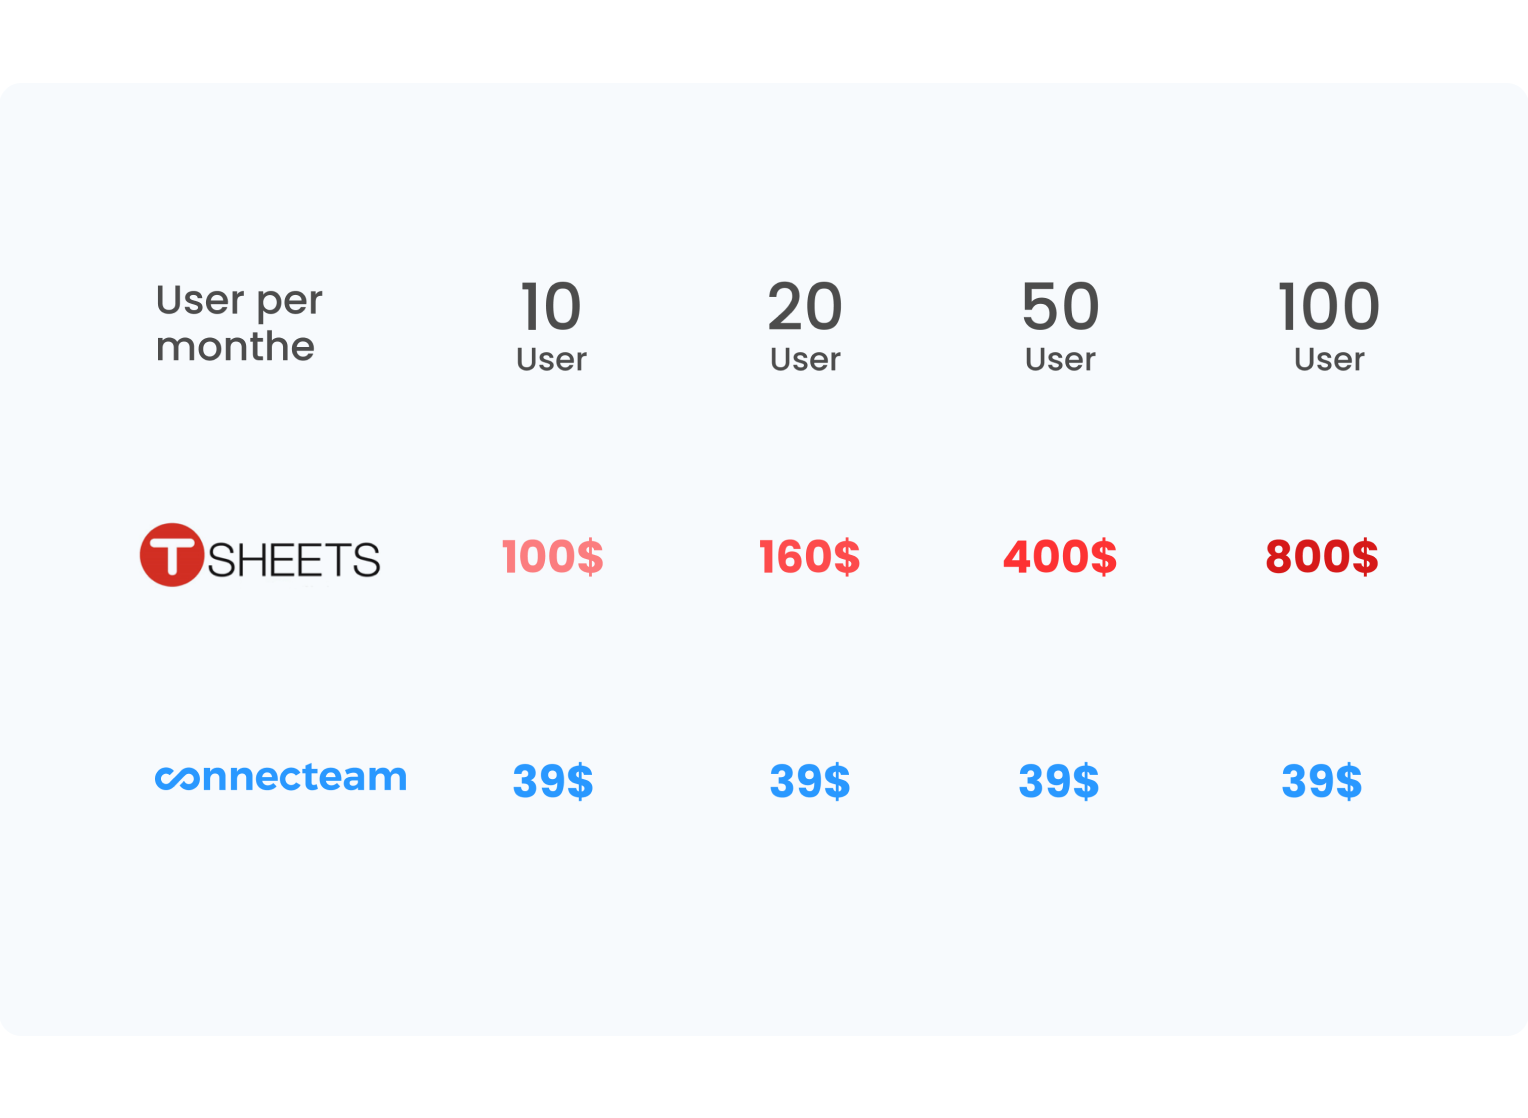 comparison of Connecteam and tsheets pricing